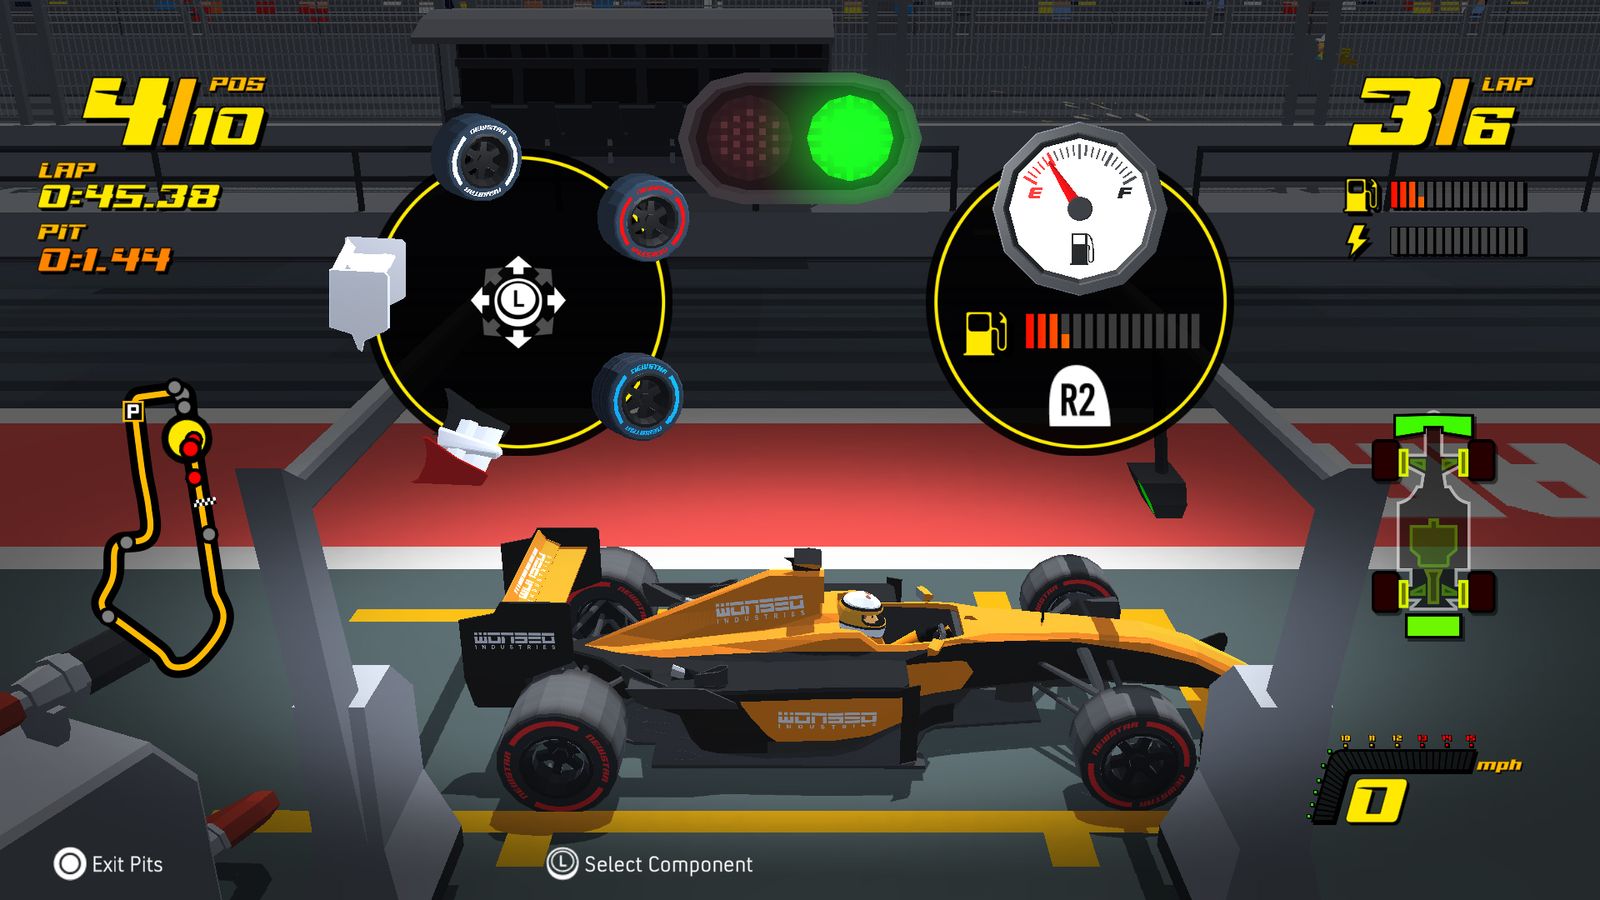 New Star GP pit stop